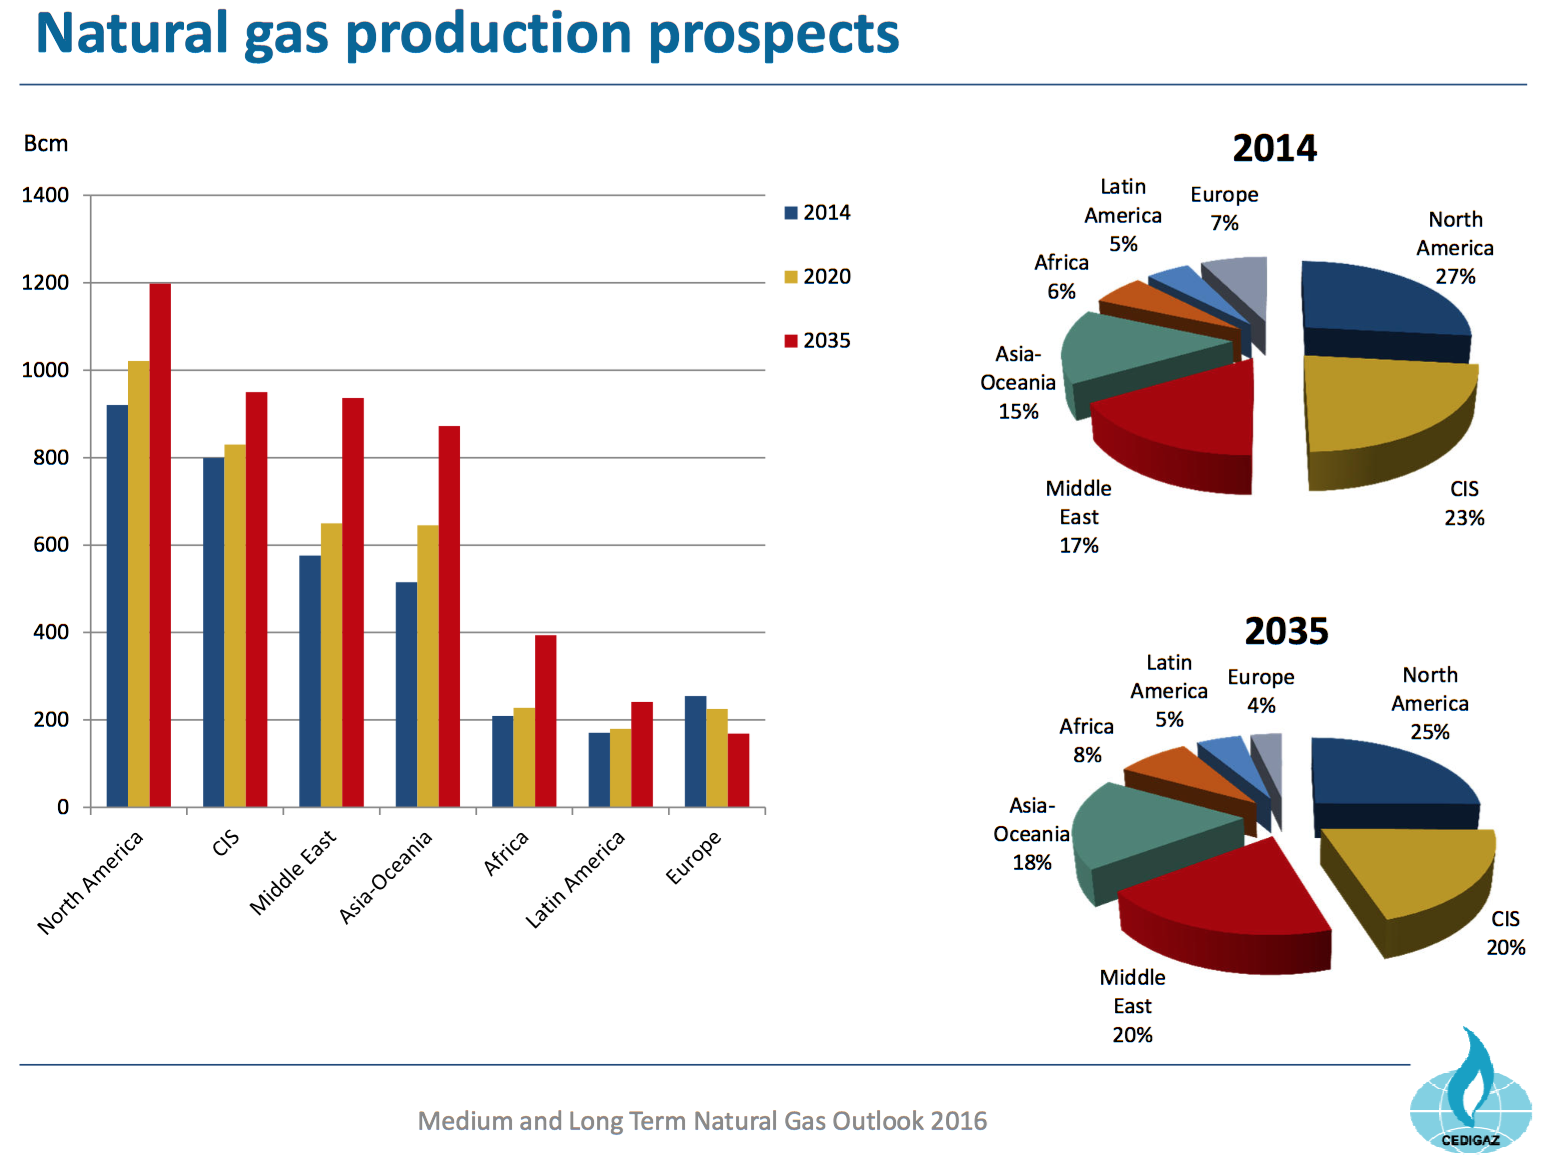 Natural Gas Production Prospects (credit: Cedigaz)